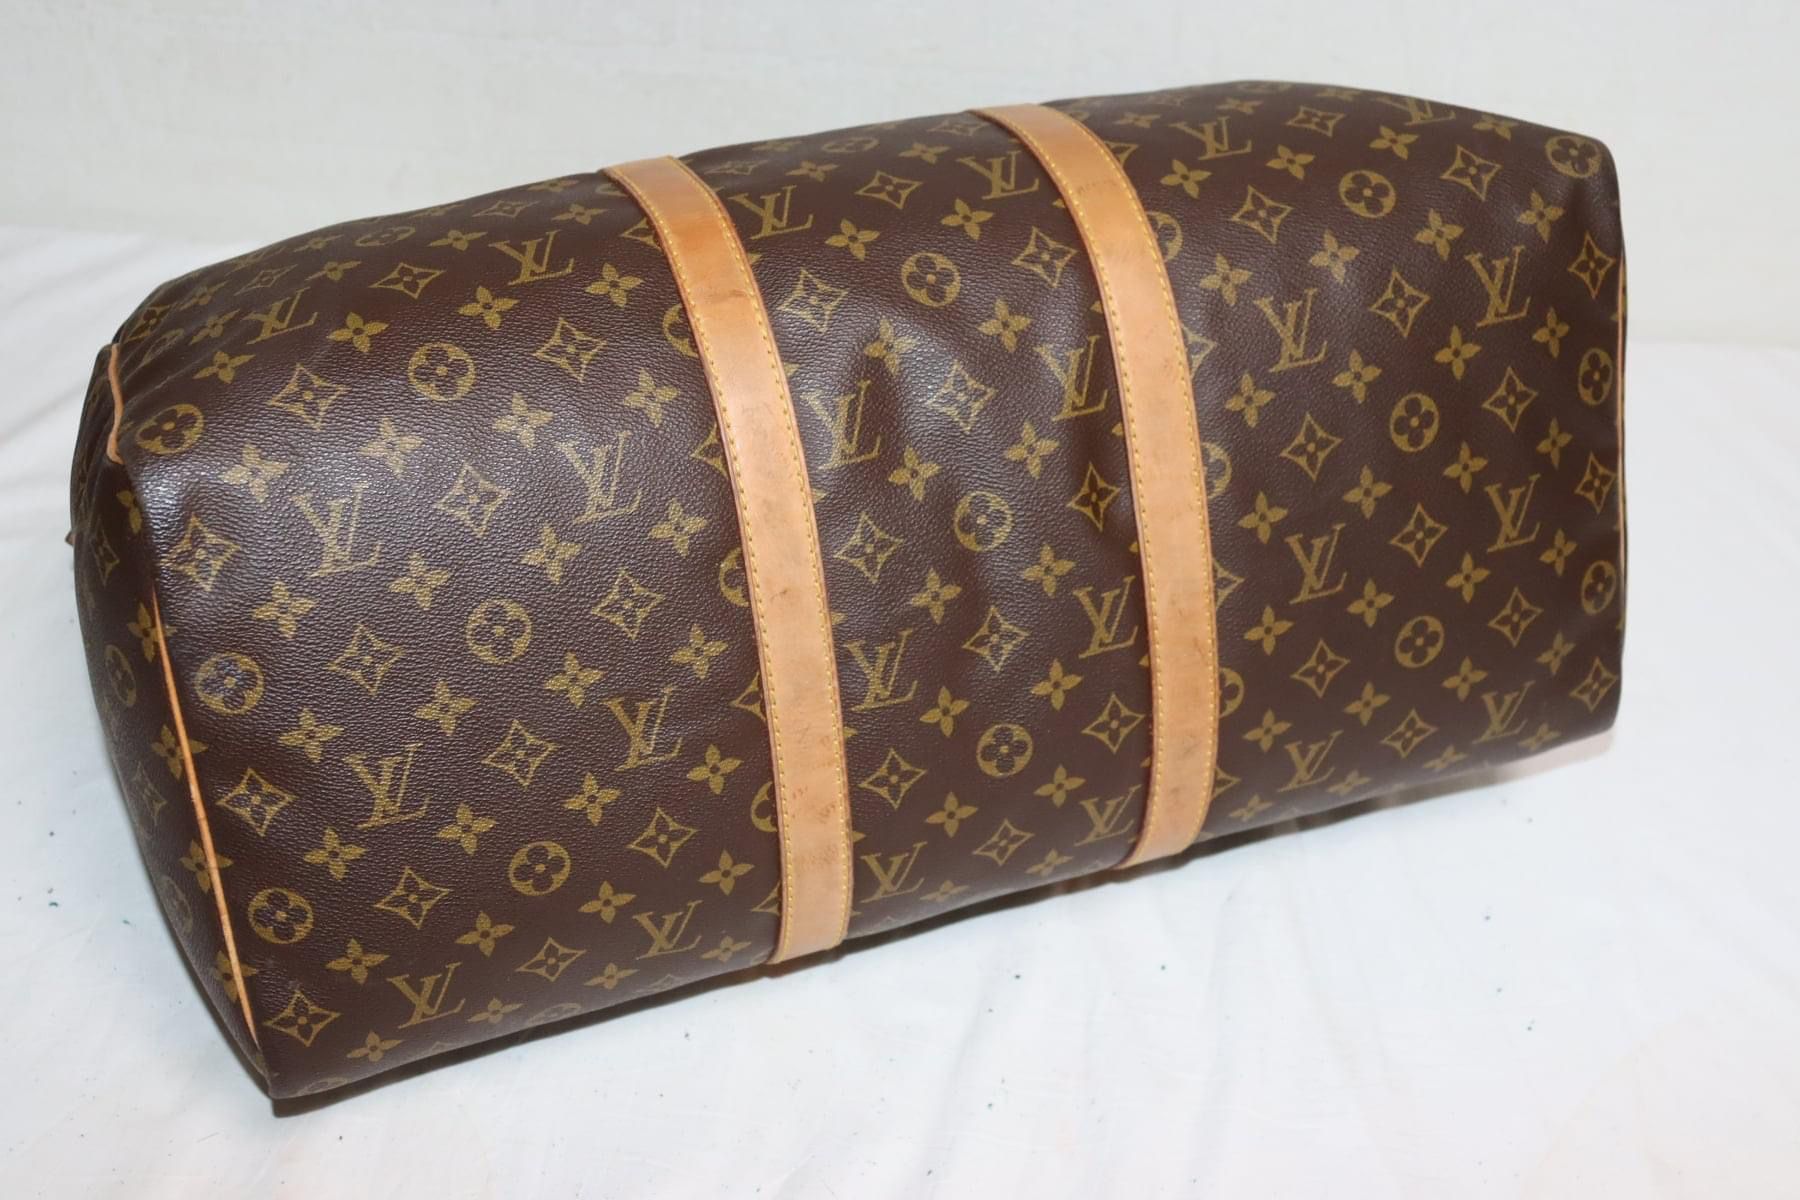 S/S 19' Louis Vuitton 50 Keepall “Prism” for Sale in Round Rock, TX -  OfferUp